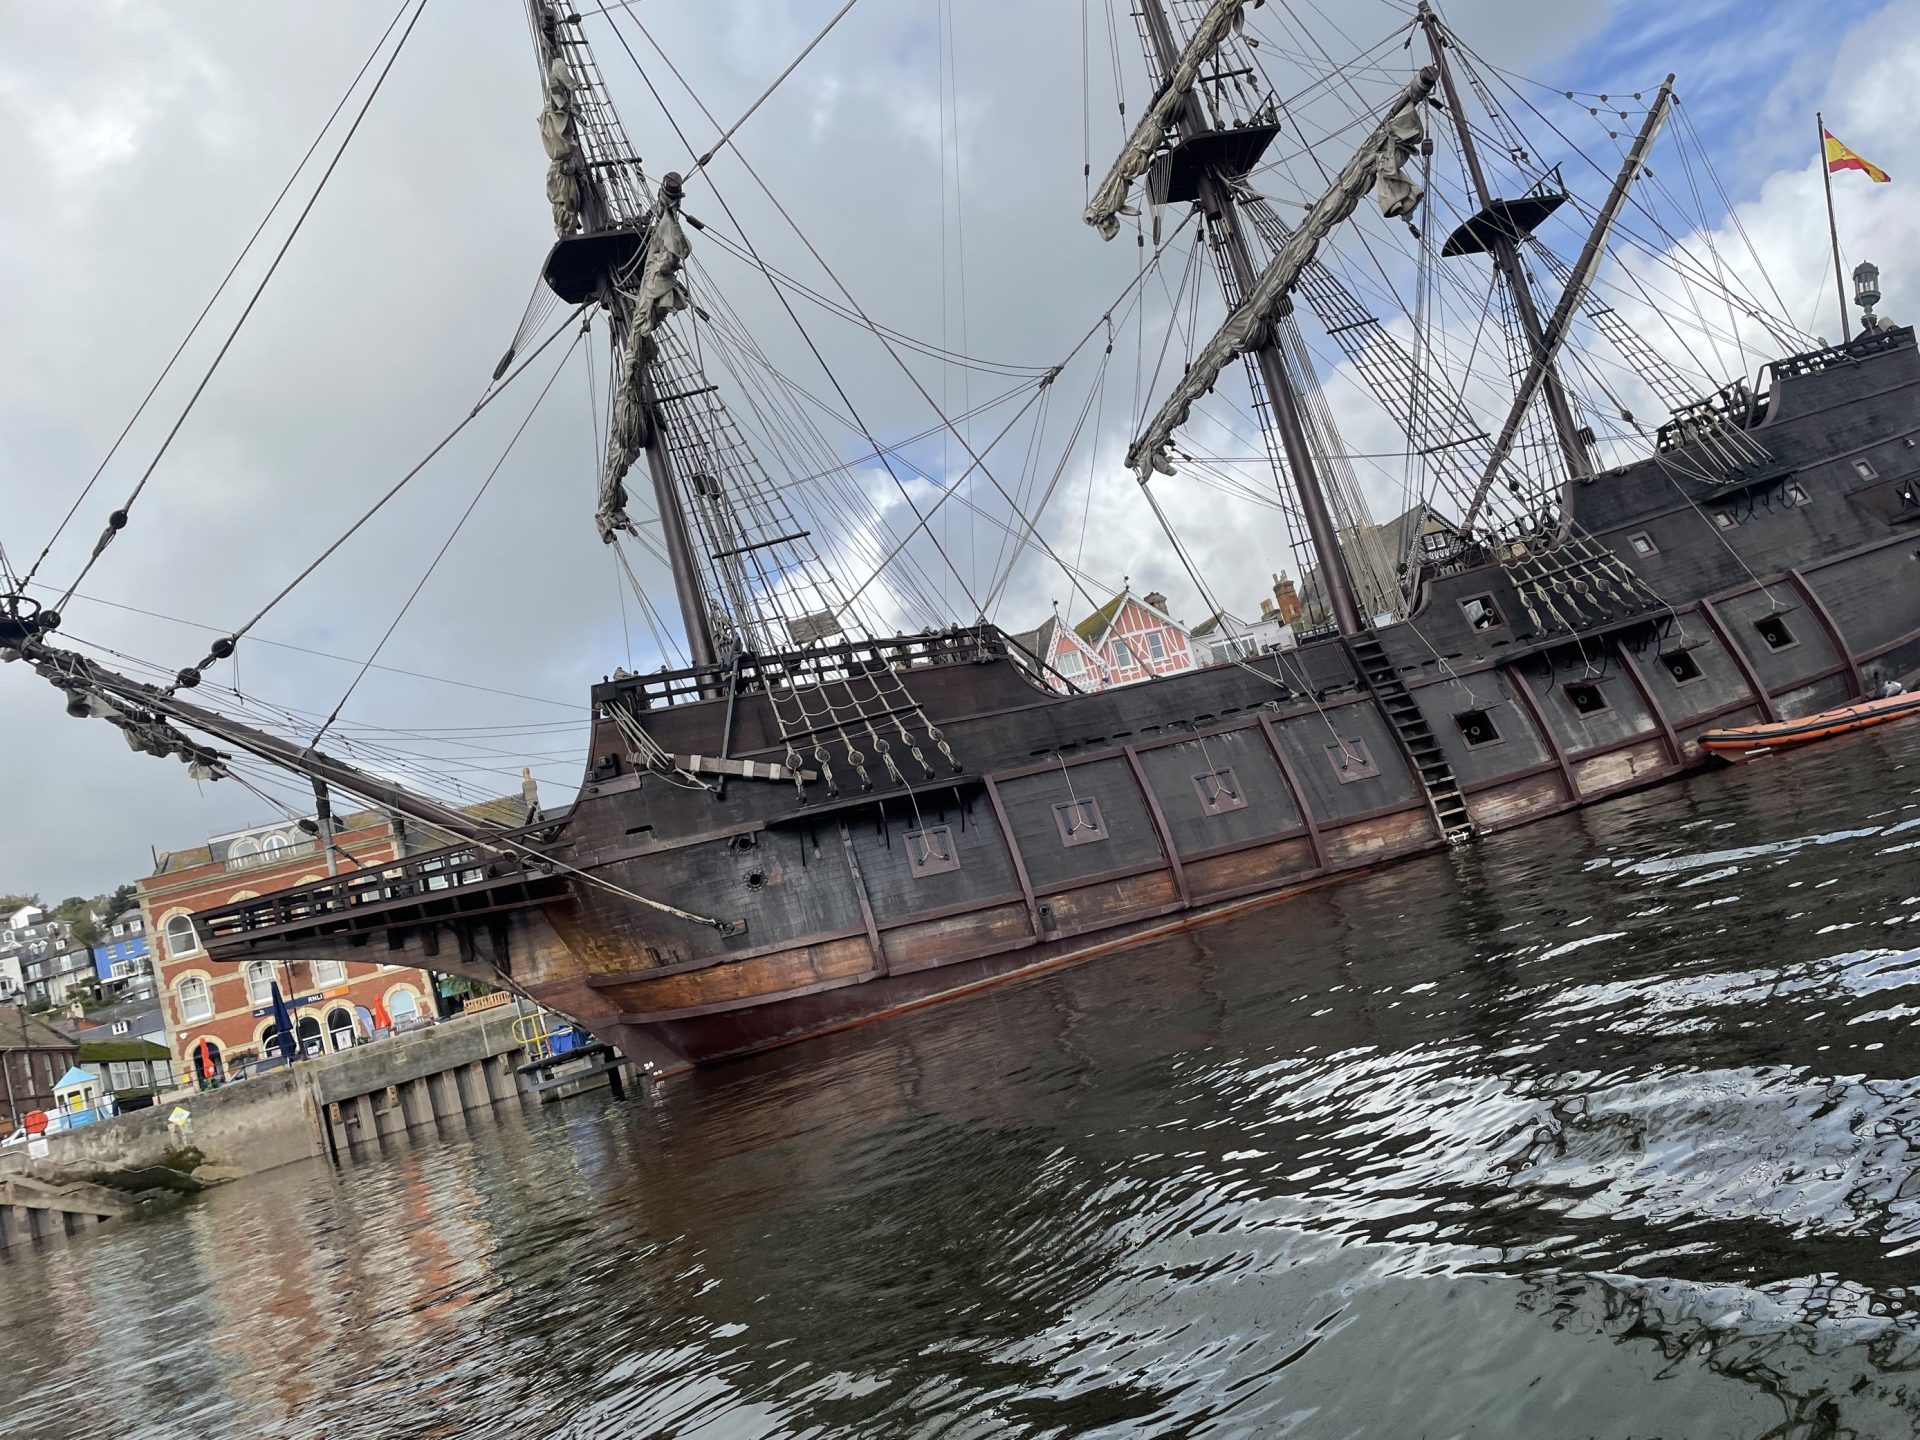 Students from the Marine Academy at South Devon College took a step back in time on board a replica 17th-century Spanish Galleon. 